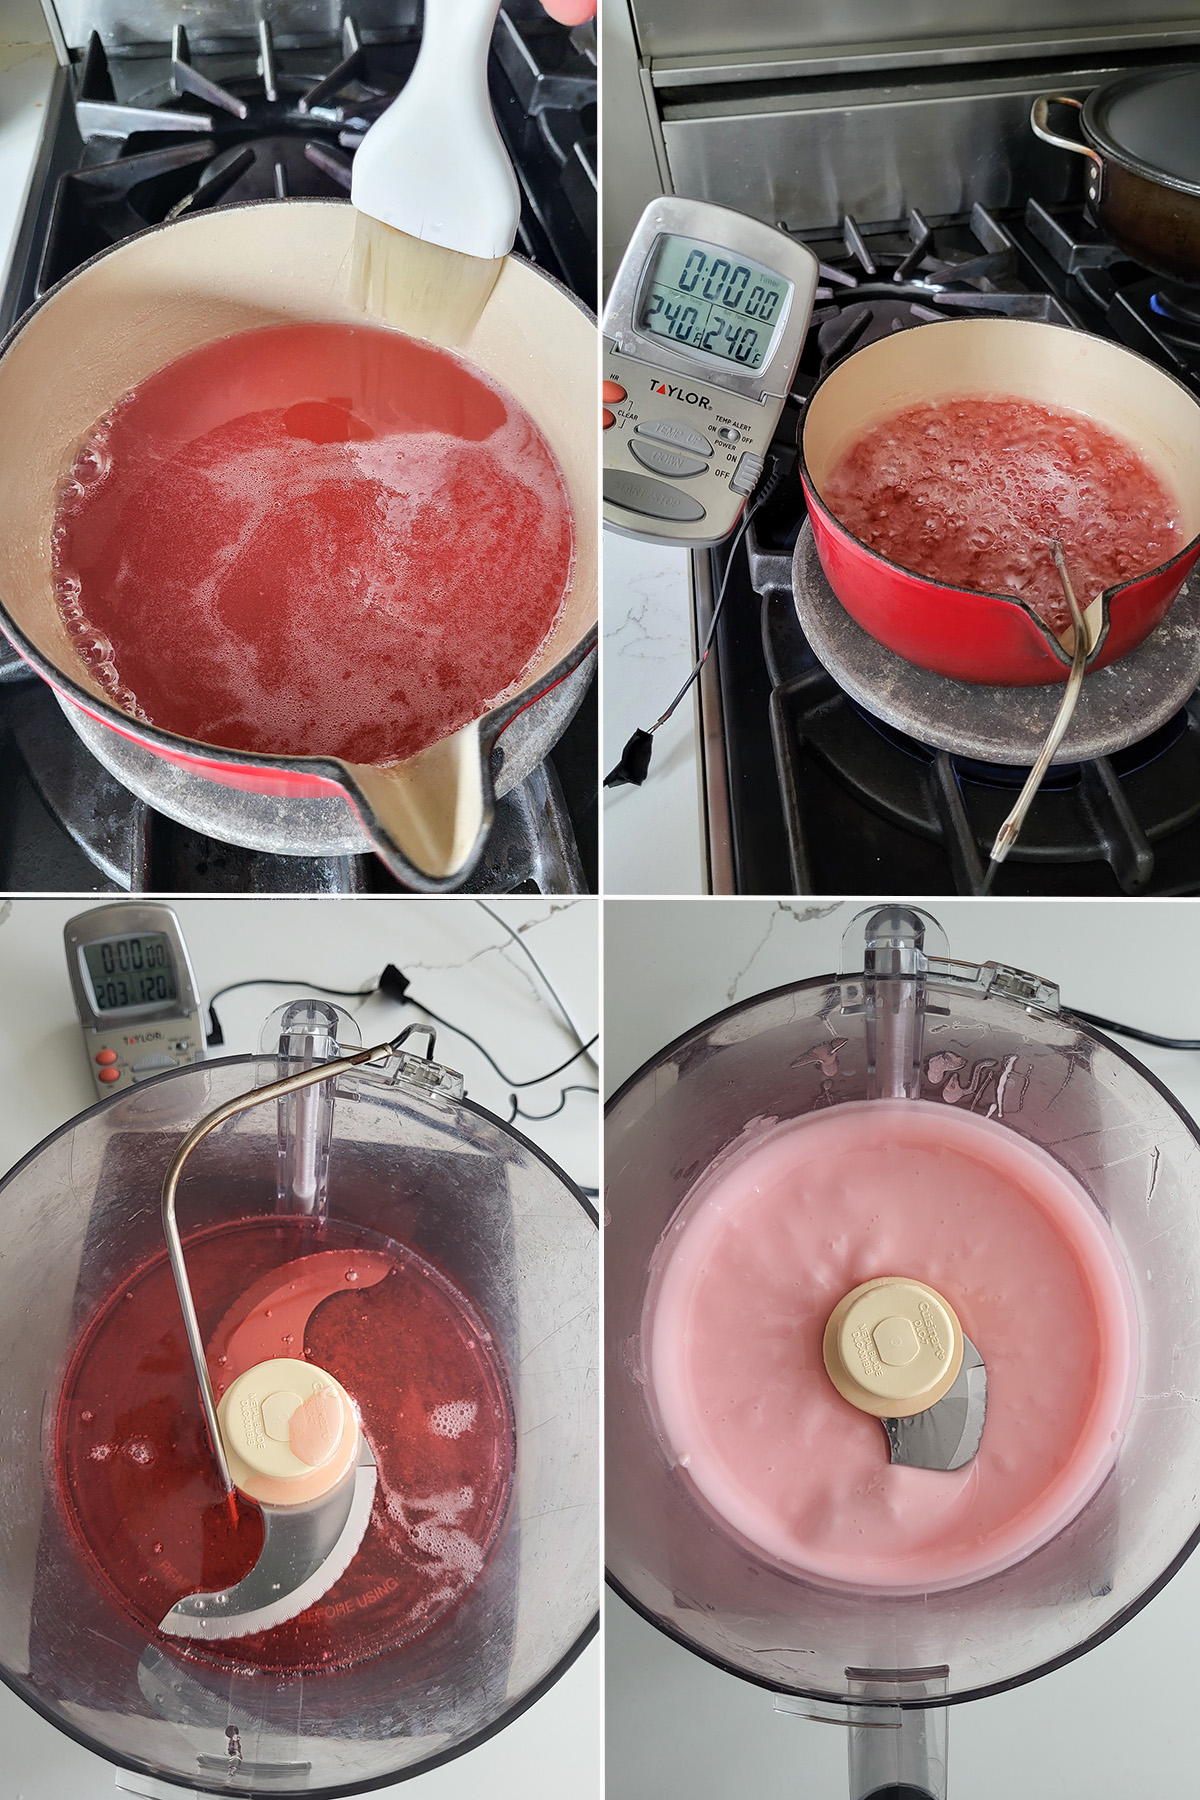 a pan with sugar syrup boiling. A food processor filled with syrup and fondant.